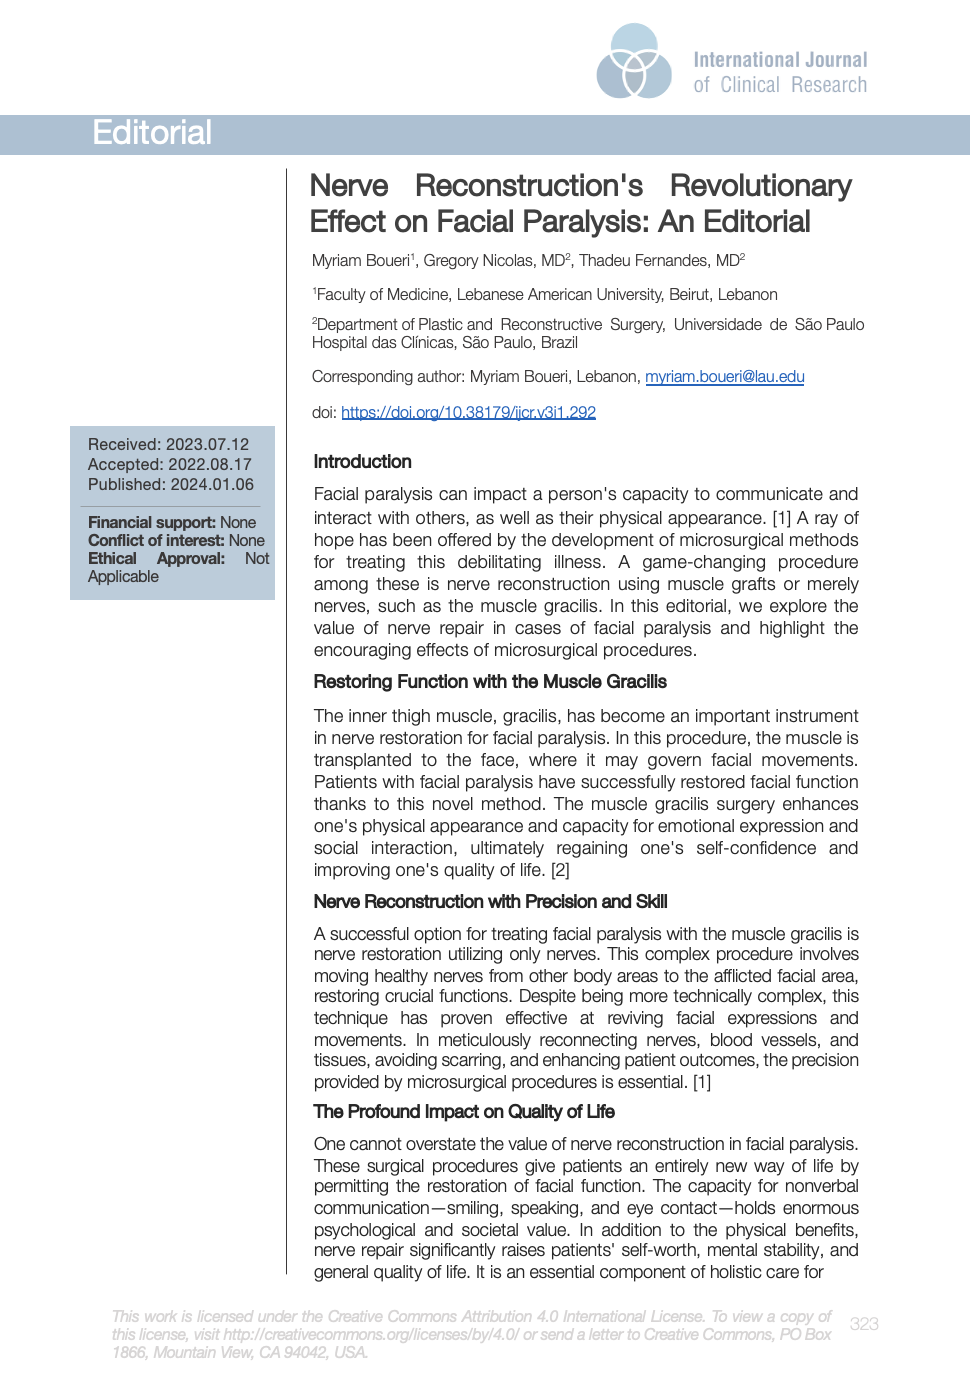 Nerve Reconstruction's Revolutionary Effect on Facial Paralysis: An Editorial